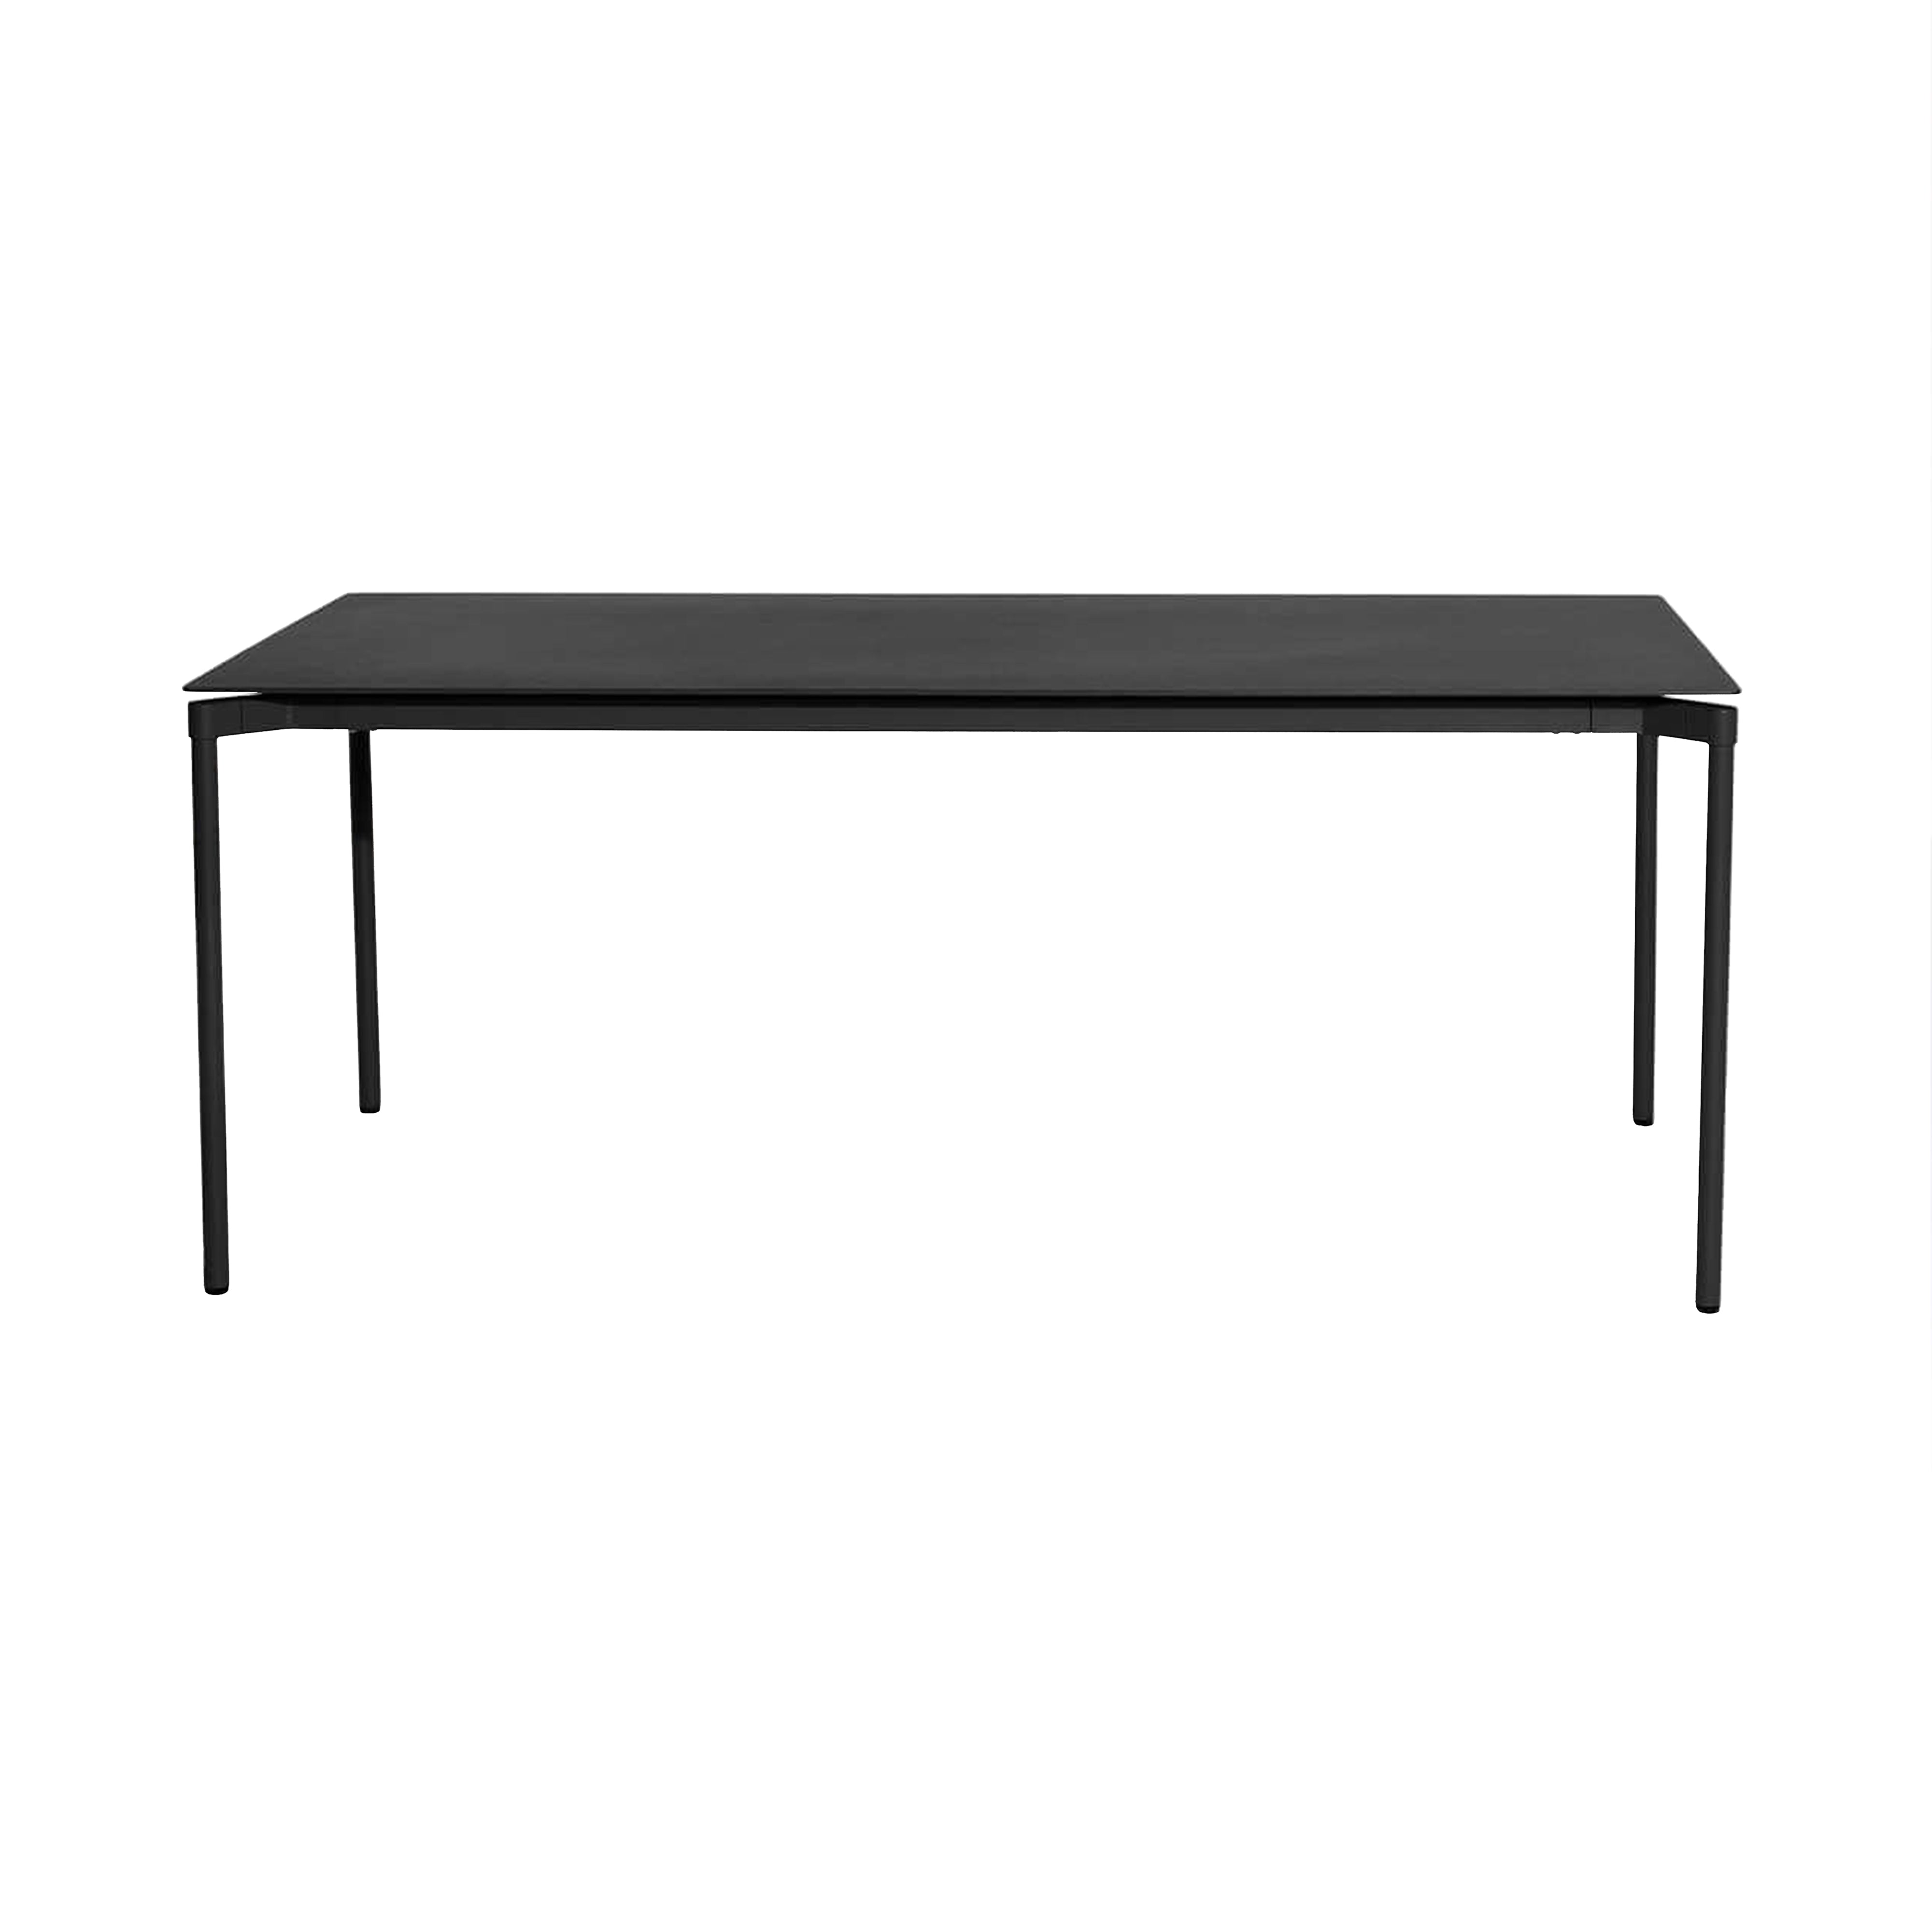 Fromme Dining Table: Outdoor + Rectangle +Black